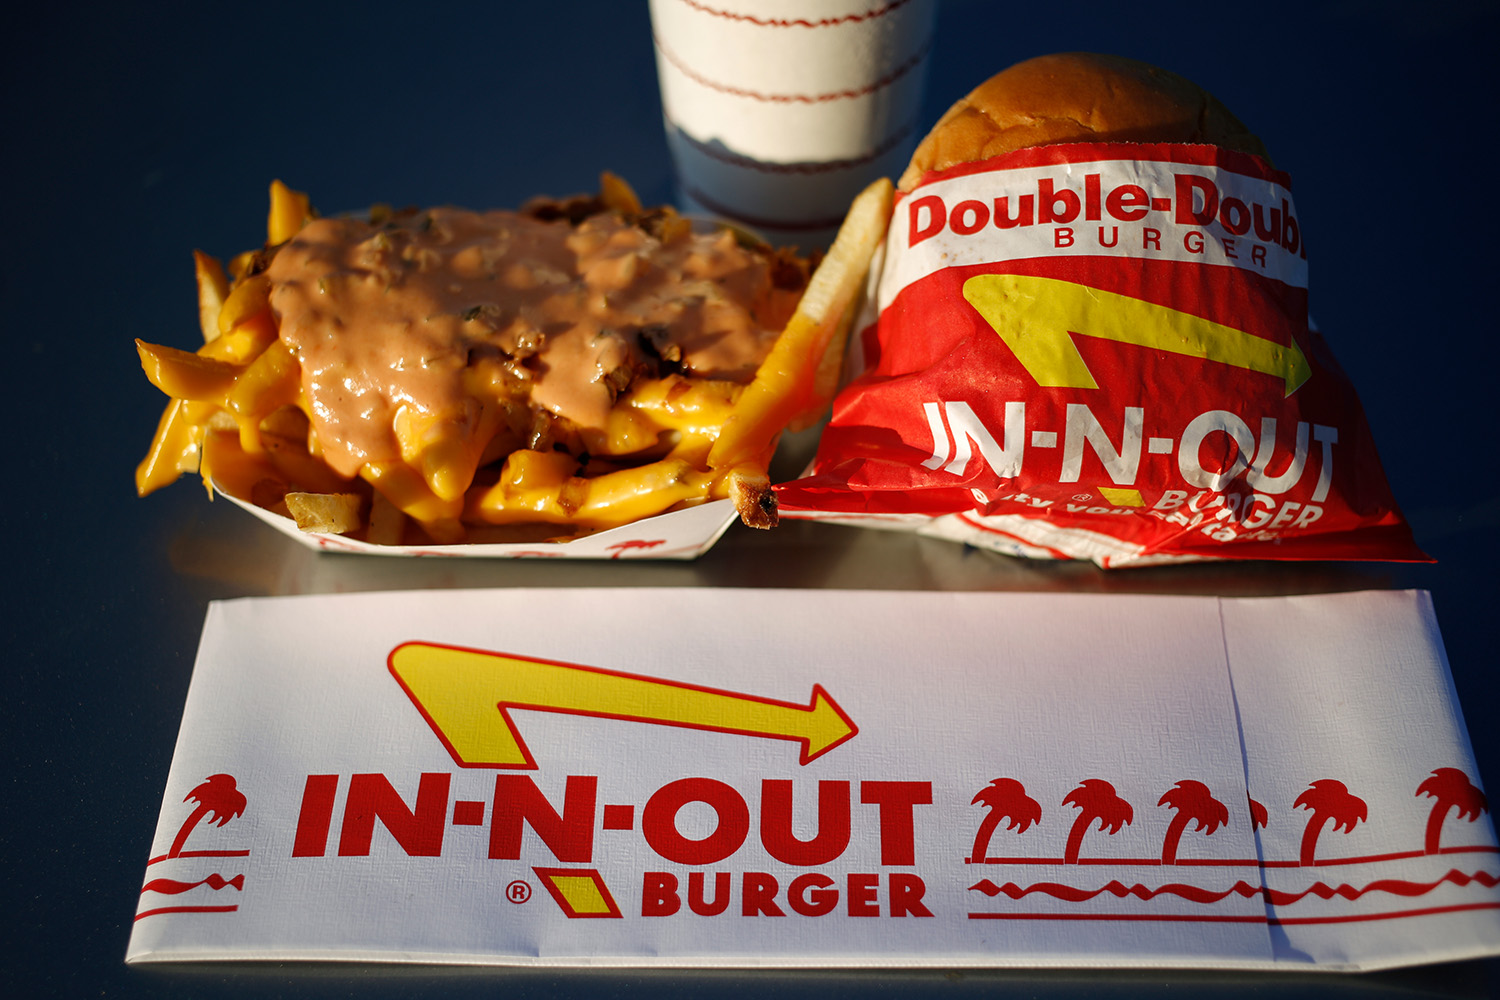 A spread of burgers and fries from In-N-Out.